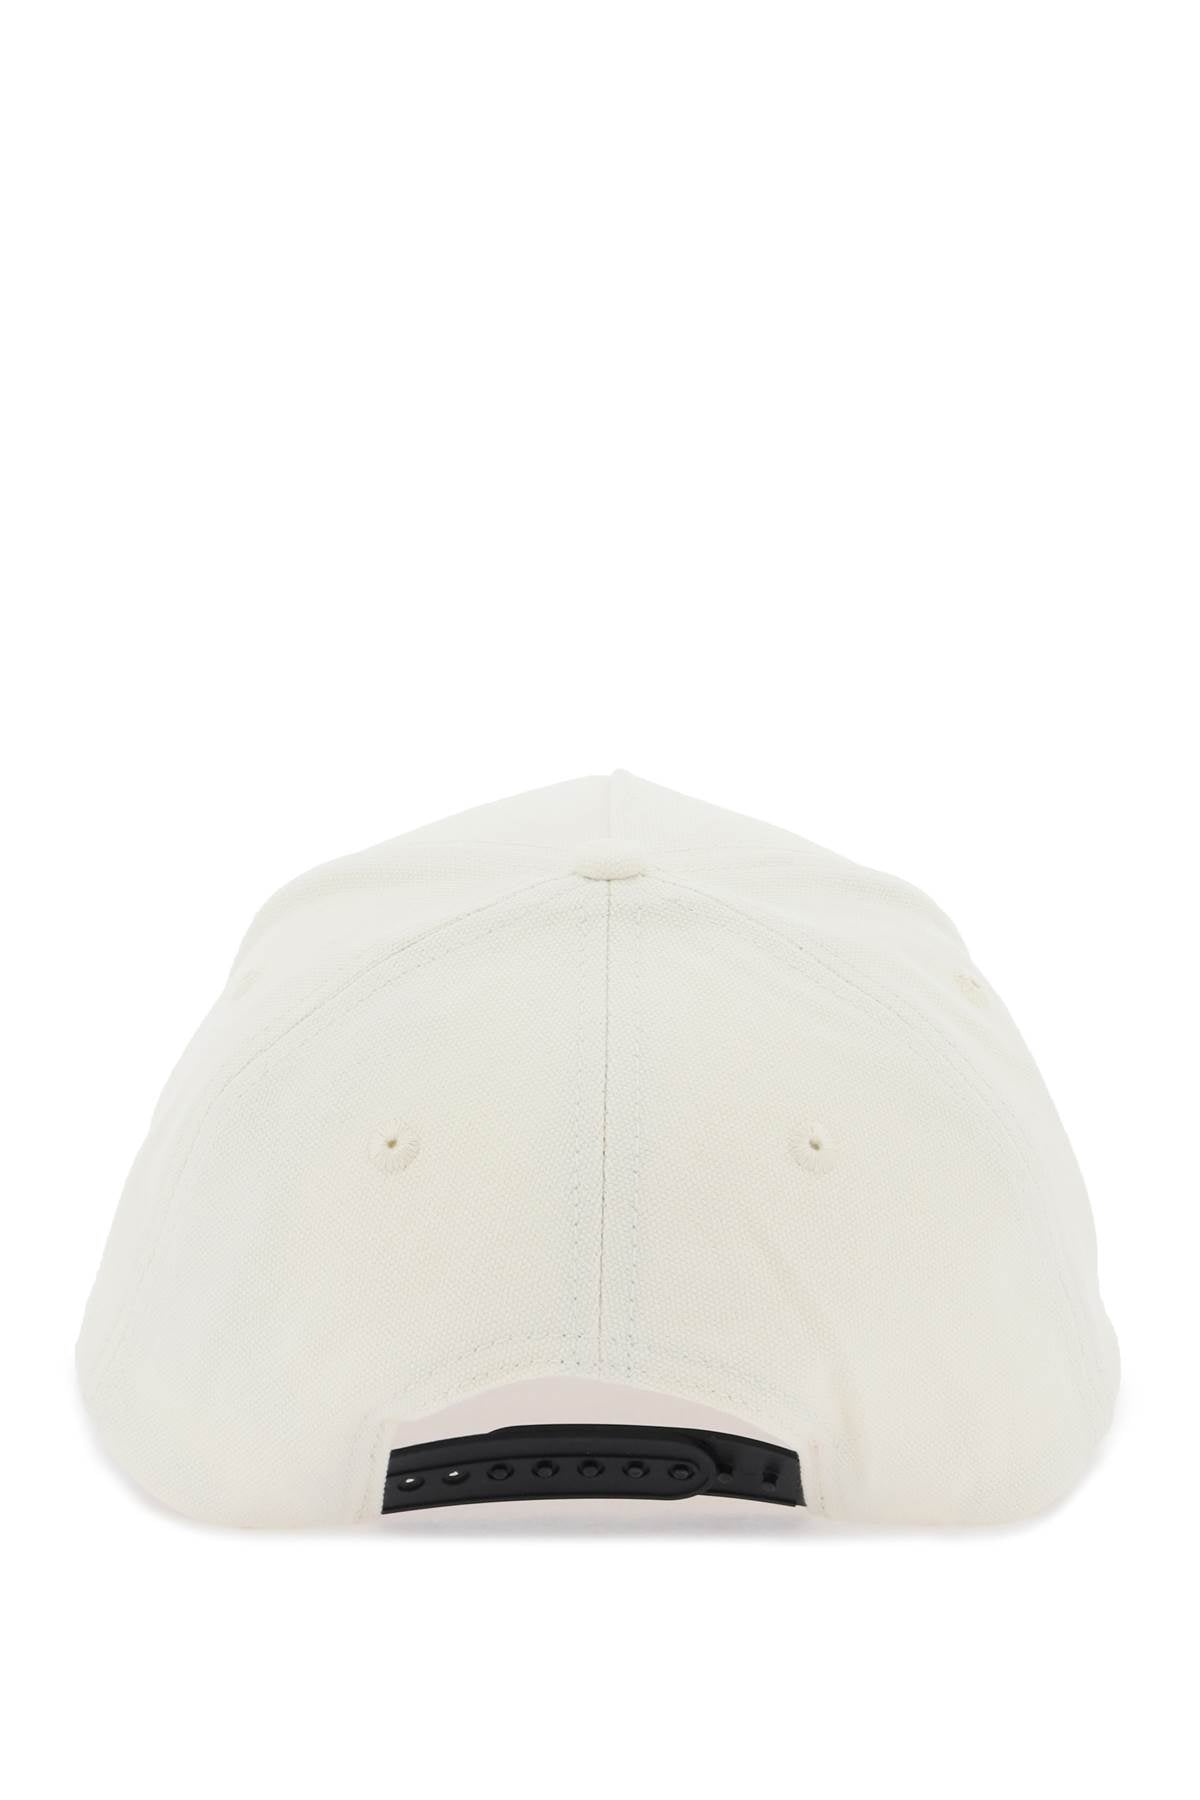 Palm angels embroidered baseball cap-2